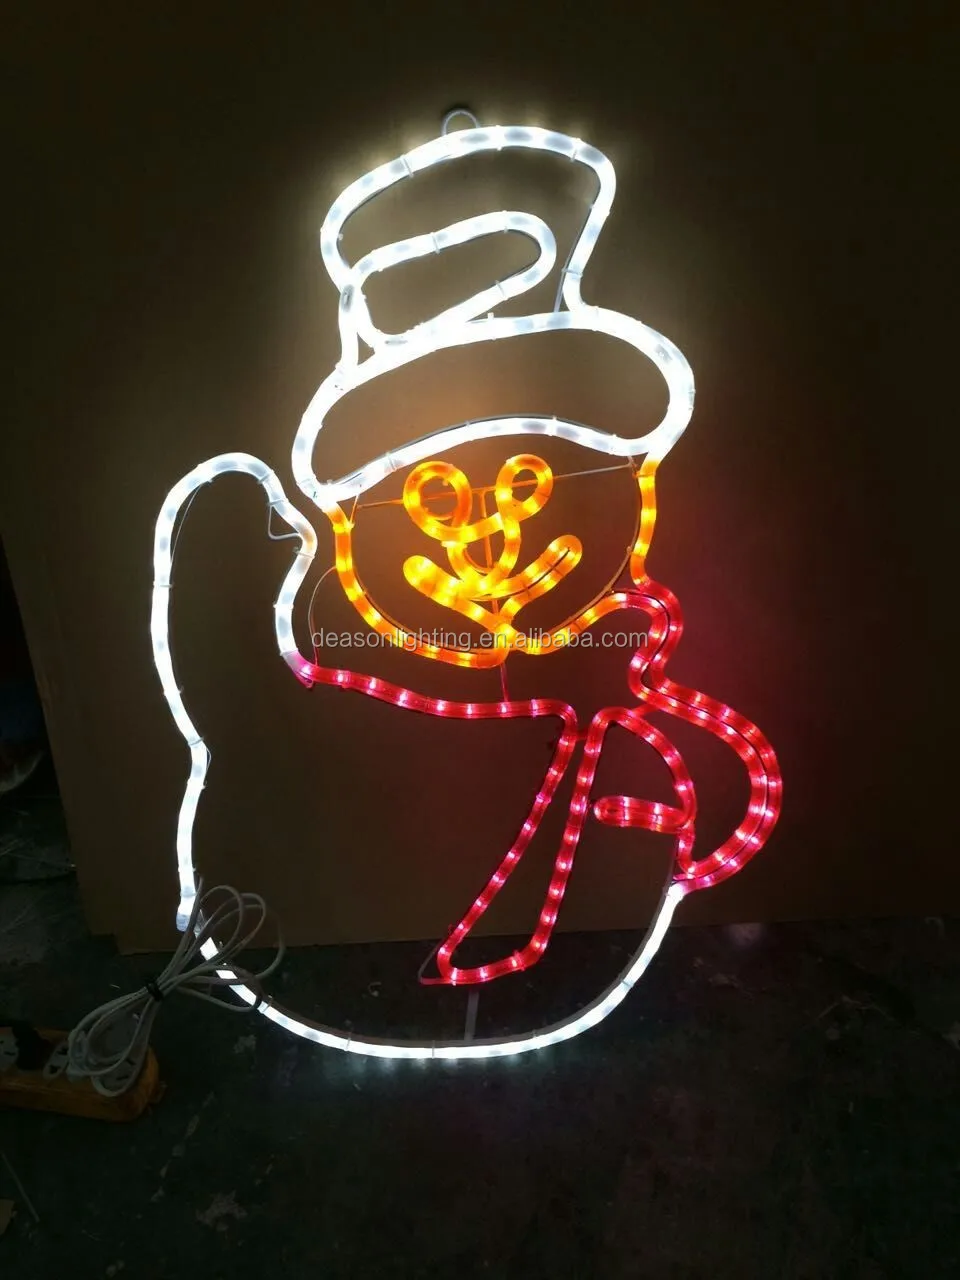 Led Snowman Outdoor - Buy Outdoor Lighted Snowman,Led Snowman Outdoor ...